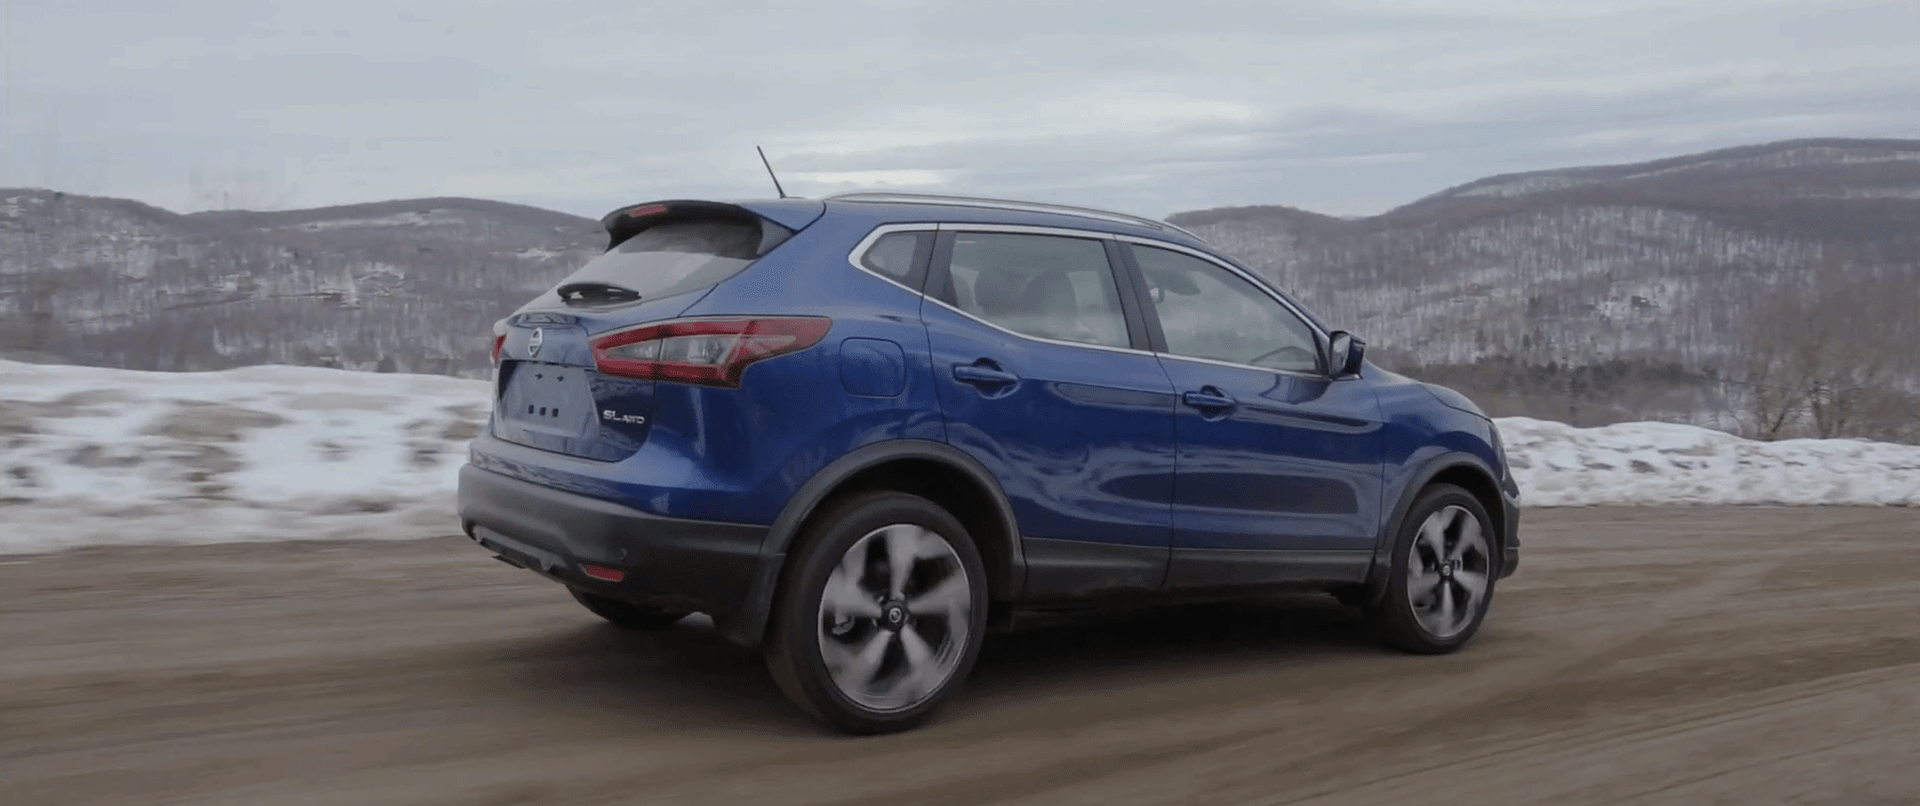 Groupe beaucage article nissan qashqai 2020 21 8